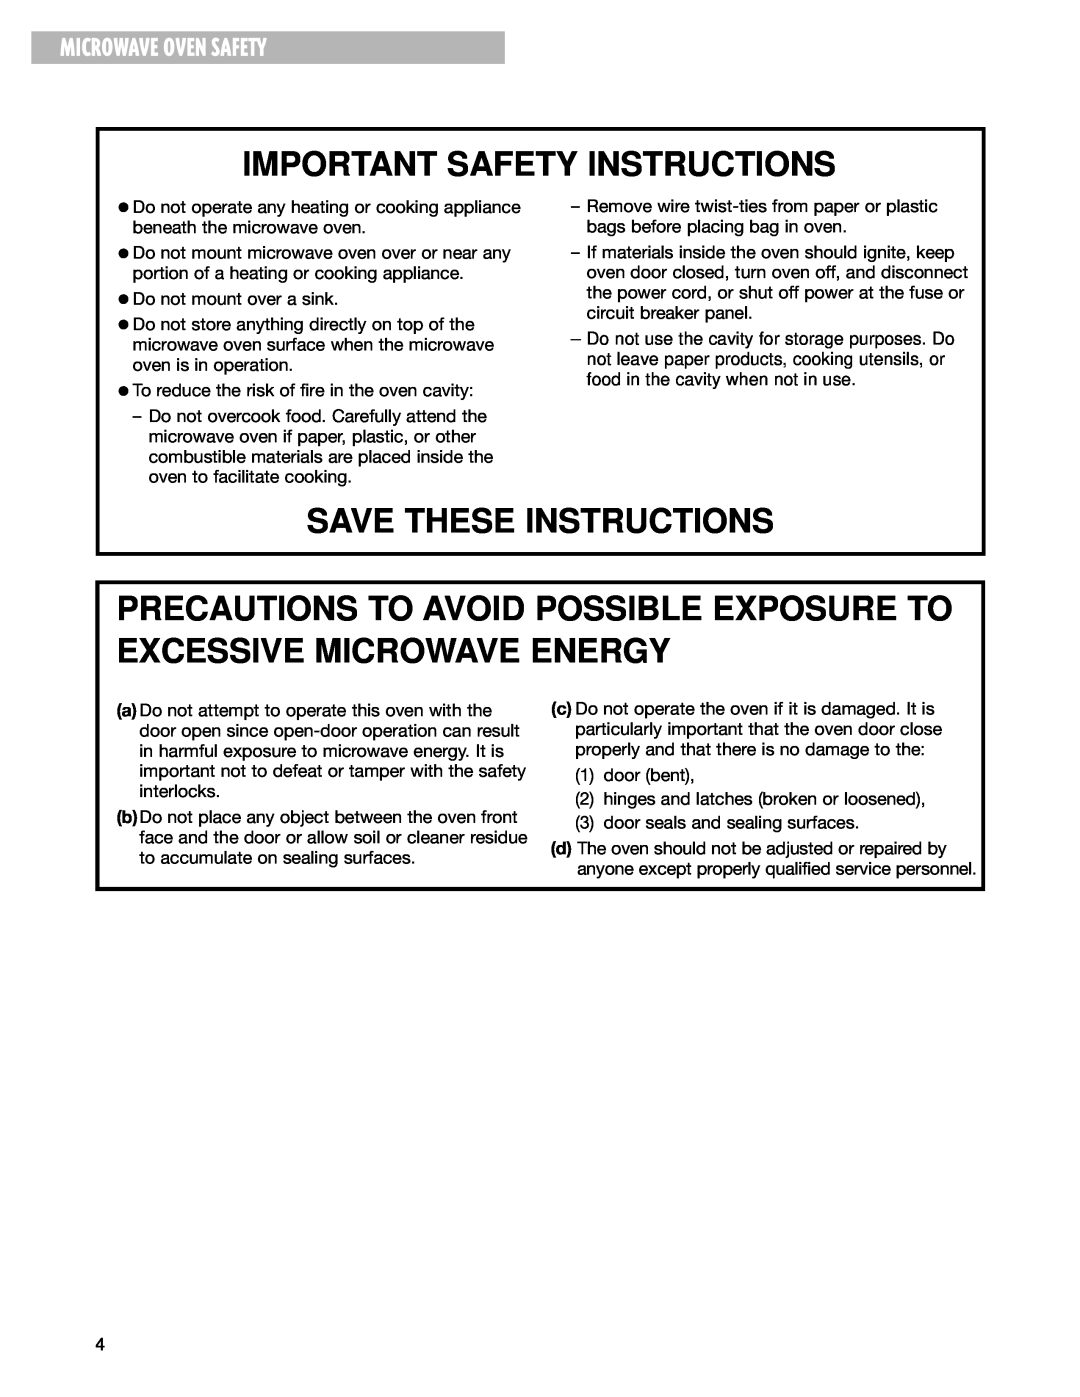 Whirlpool MT3135SH, MT3105SH Precautions To Avoid Possible Exposure To Excessive Microwave Energy, Microwave Oven Safety 